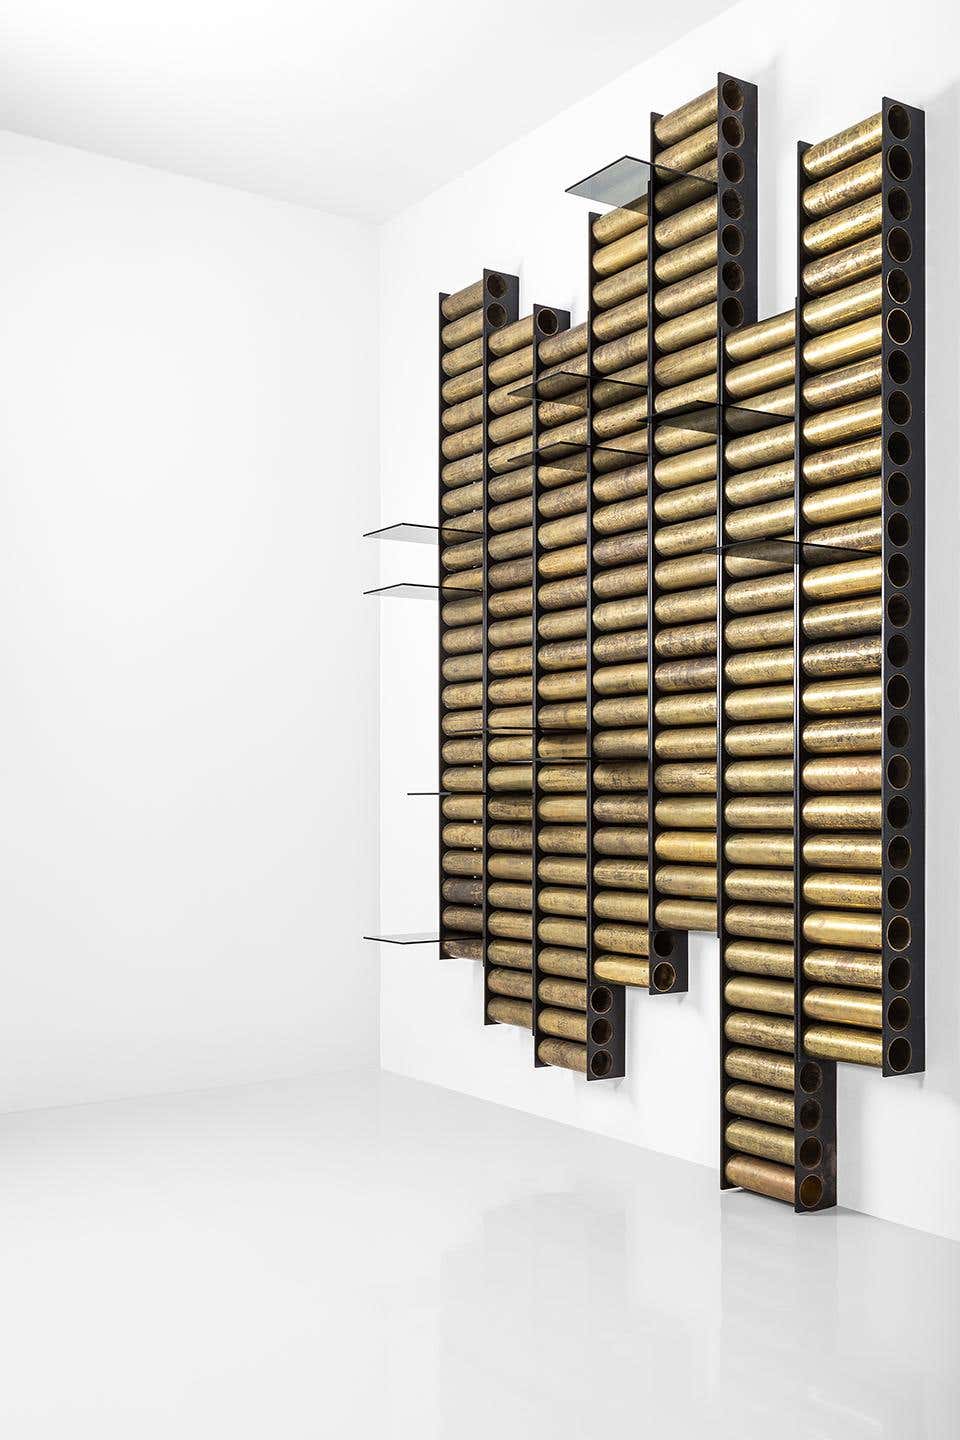 This Shelving System with Oxidized Brass Tubes Is Retro and Futuristic at Once